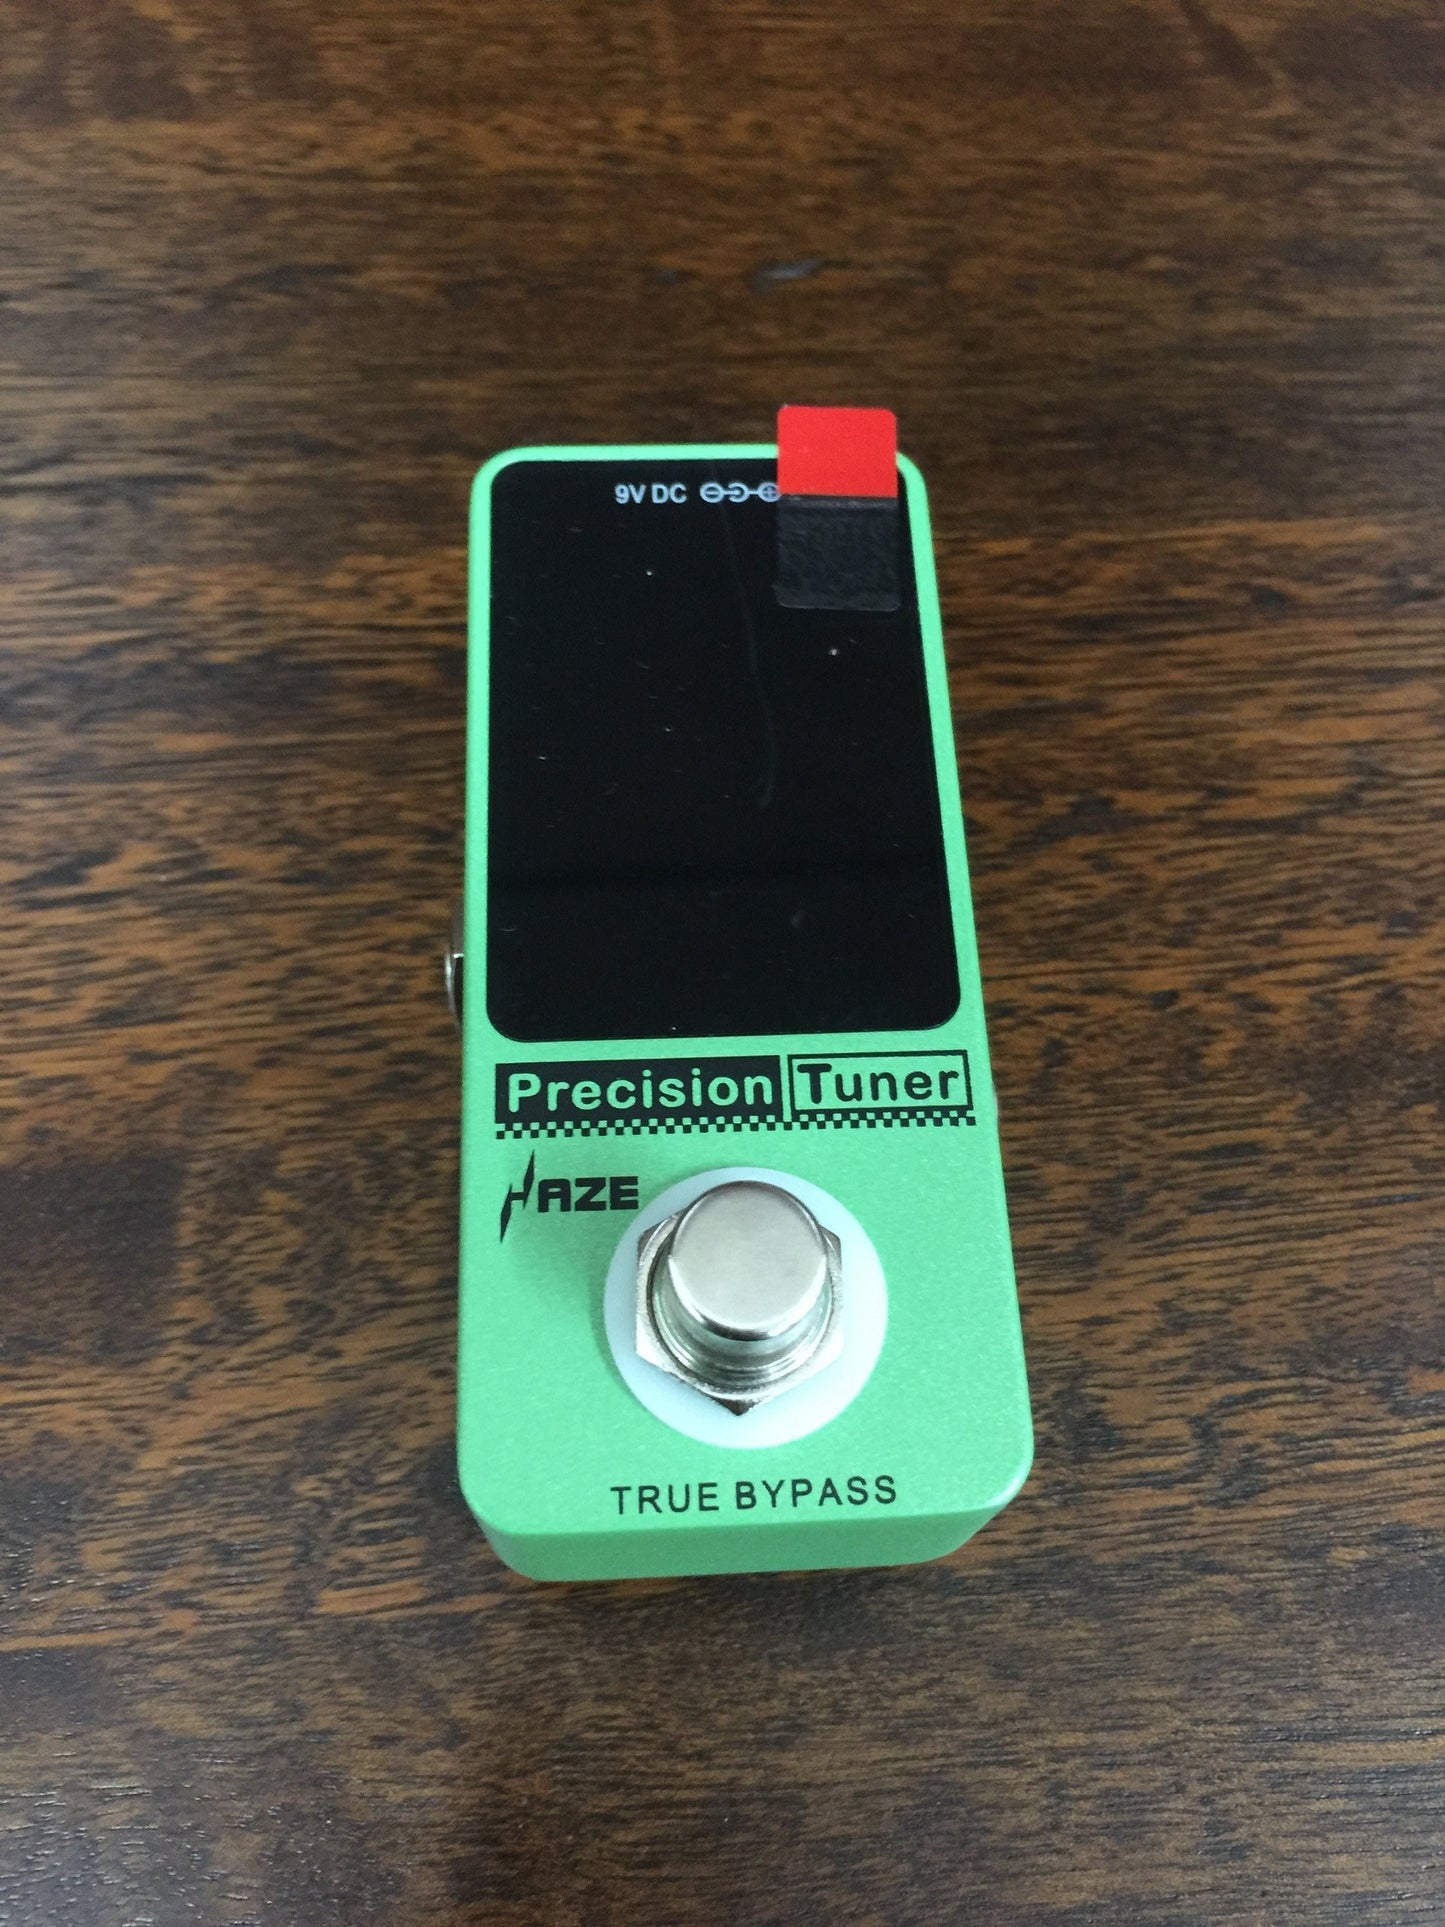 Haze Chromatic Tuner True Bypass Pedal LED Display